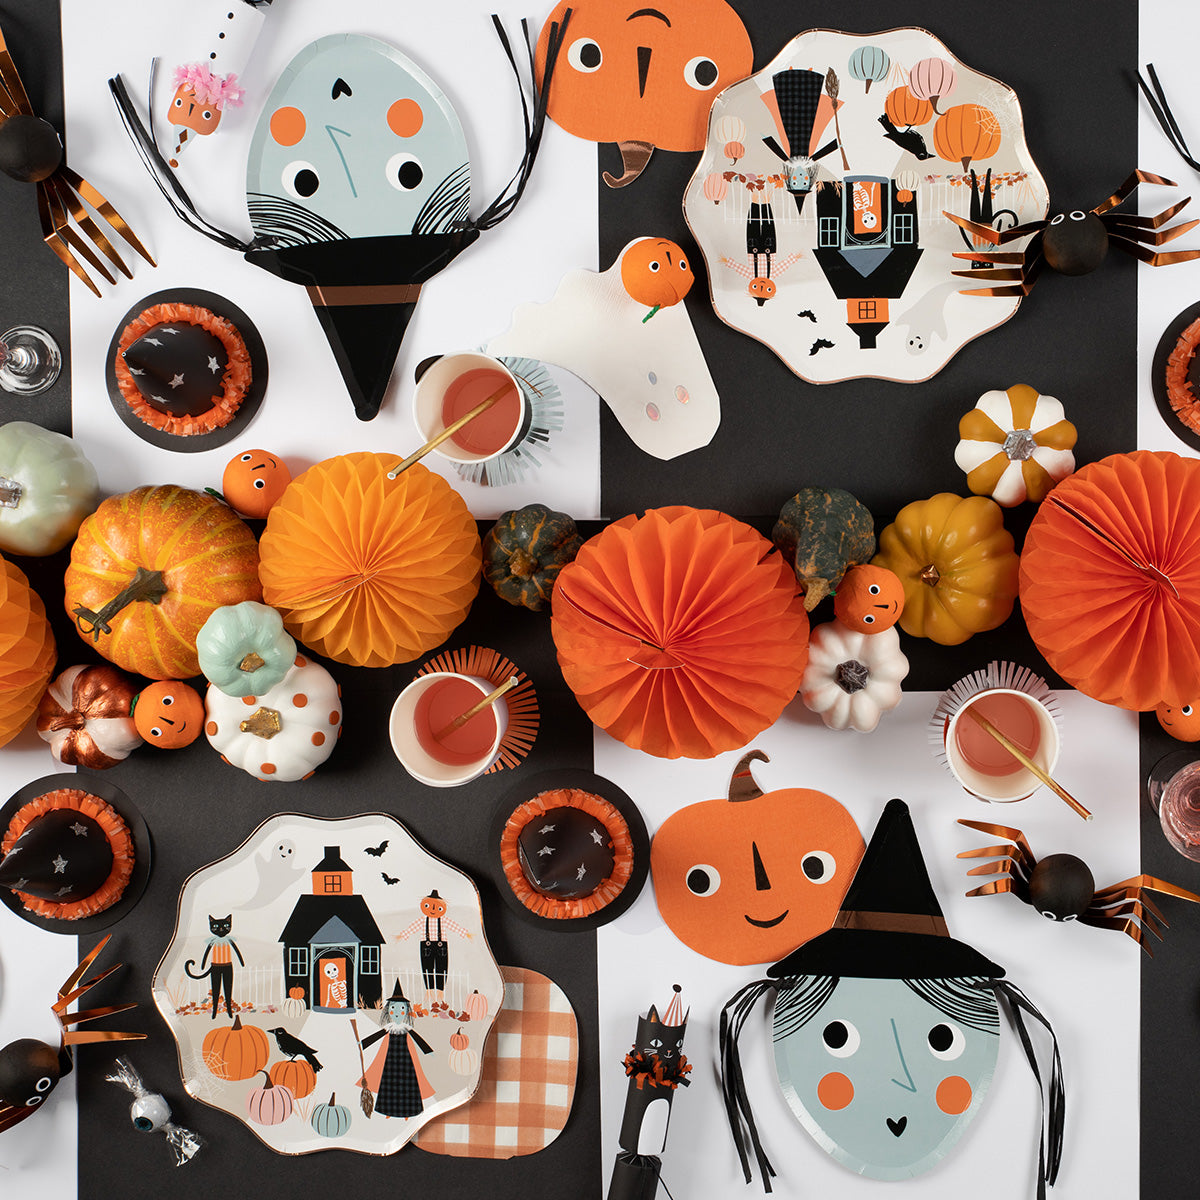 These surprise balls, in the shape of pumpkins, make the perfect Halloween gifts for kids.